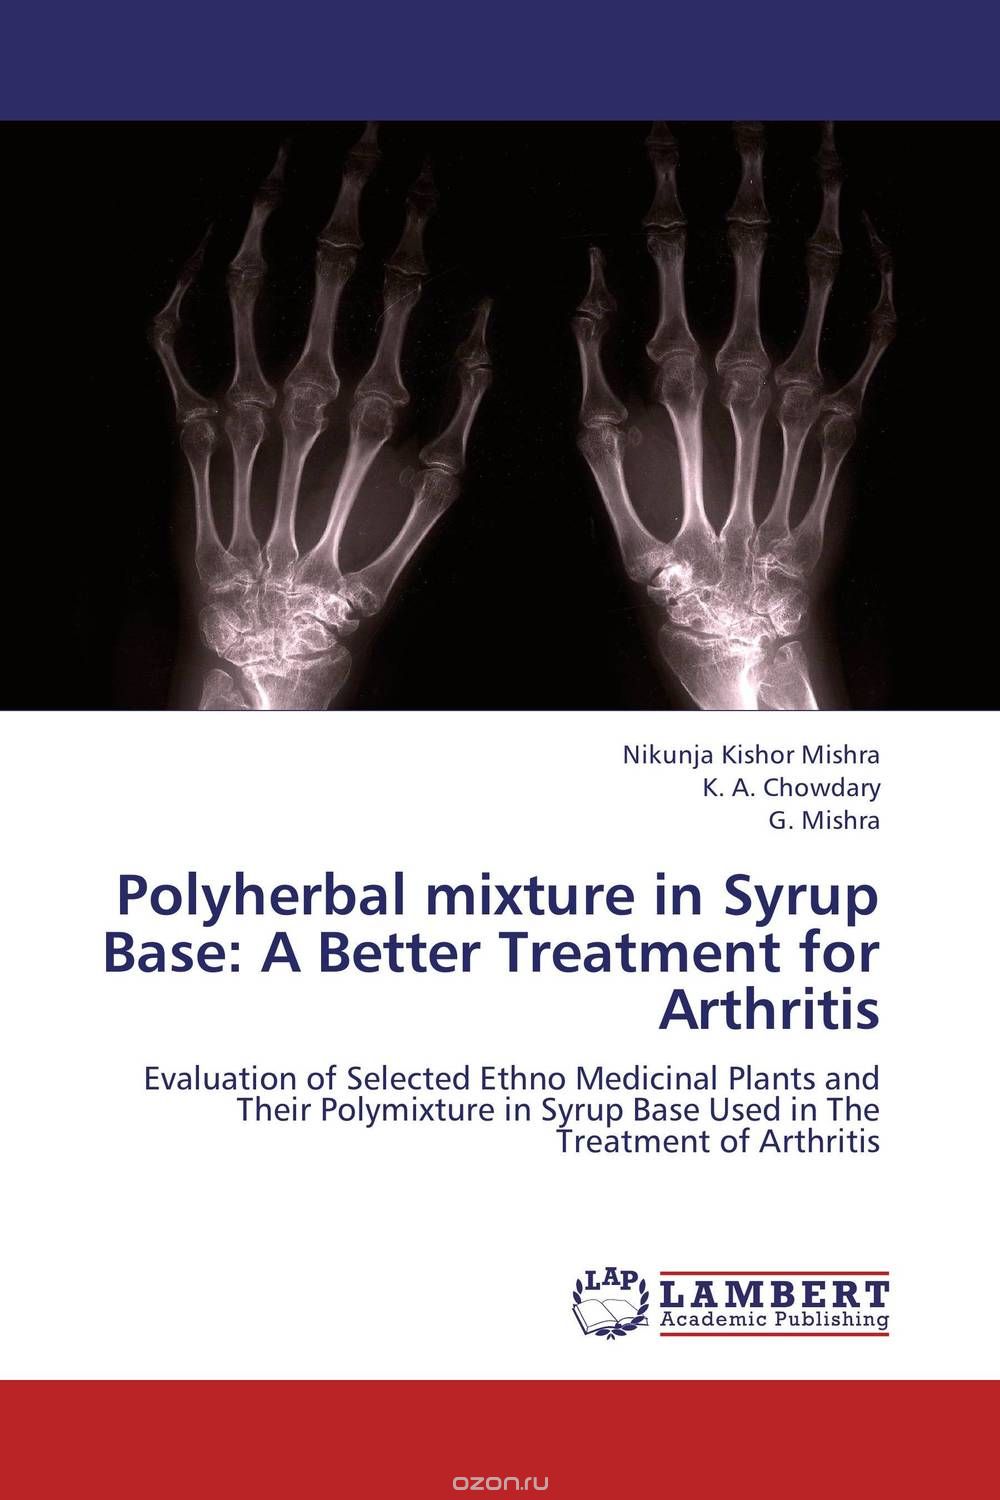 Polyherbal mixture in Syrup Base: A Better Treatment for Arthritis